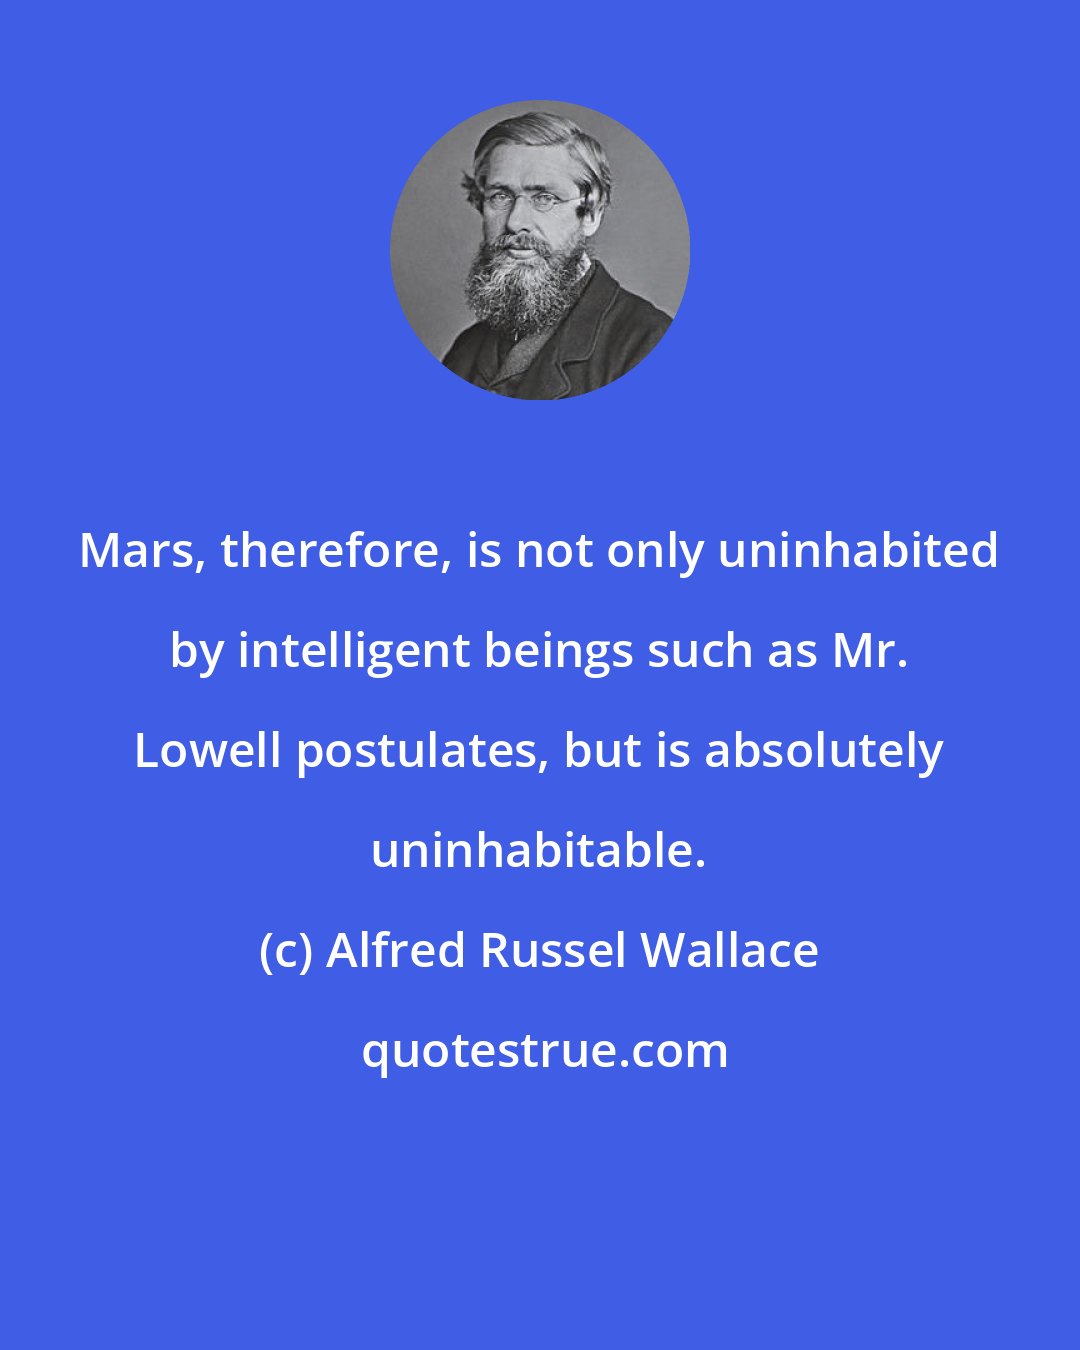 Alfred Russel Wallace: Mars, therefore, is not only uninhabited by intelligent beings such as Mr. Lowell postulates, but is absolutely uninhabitable.